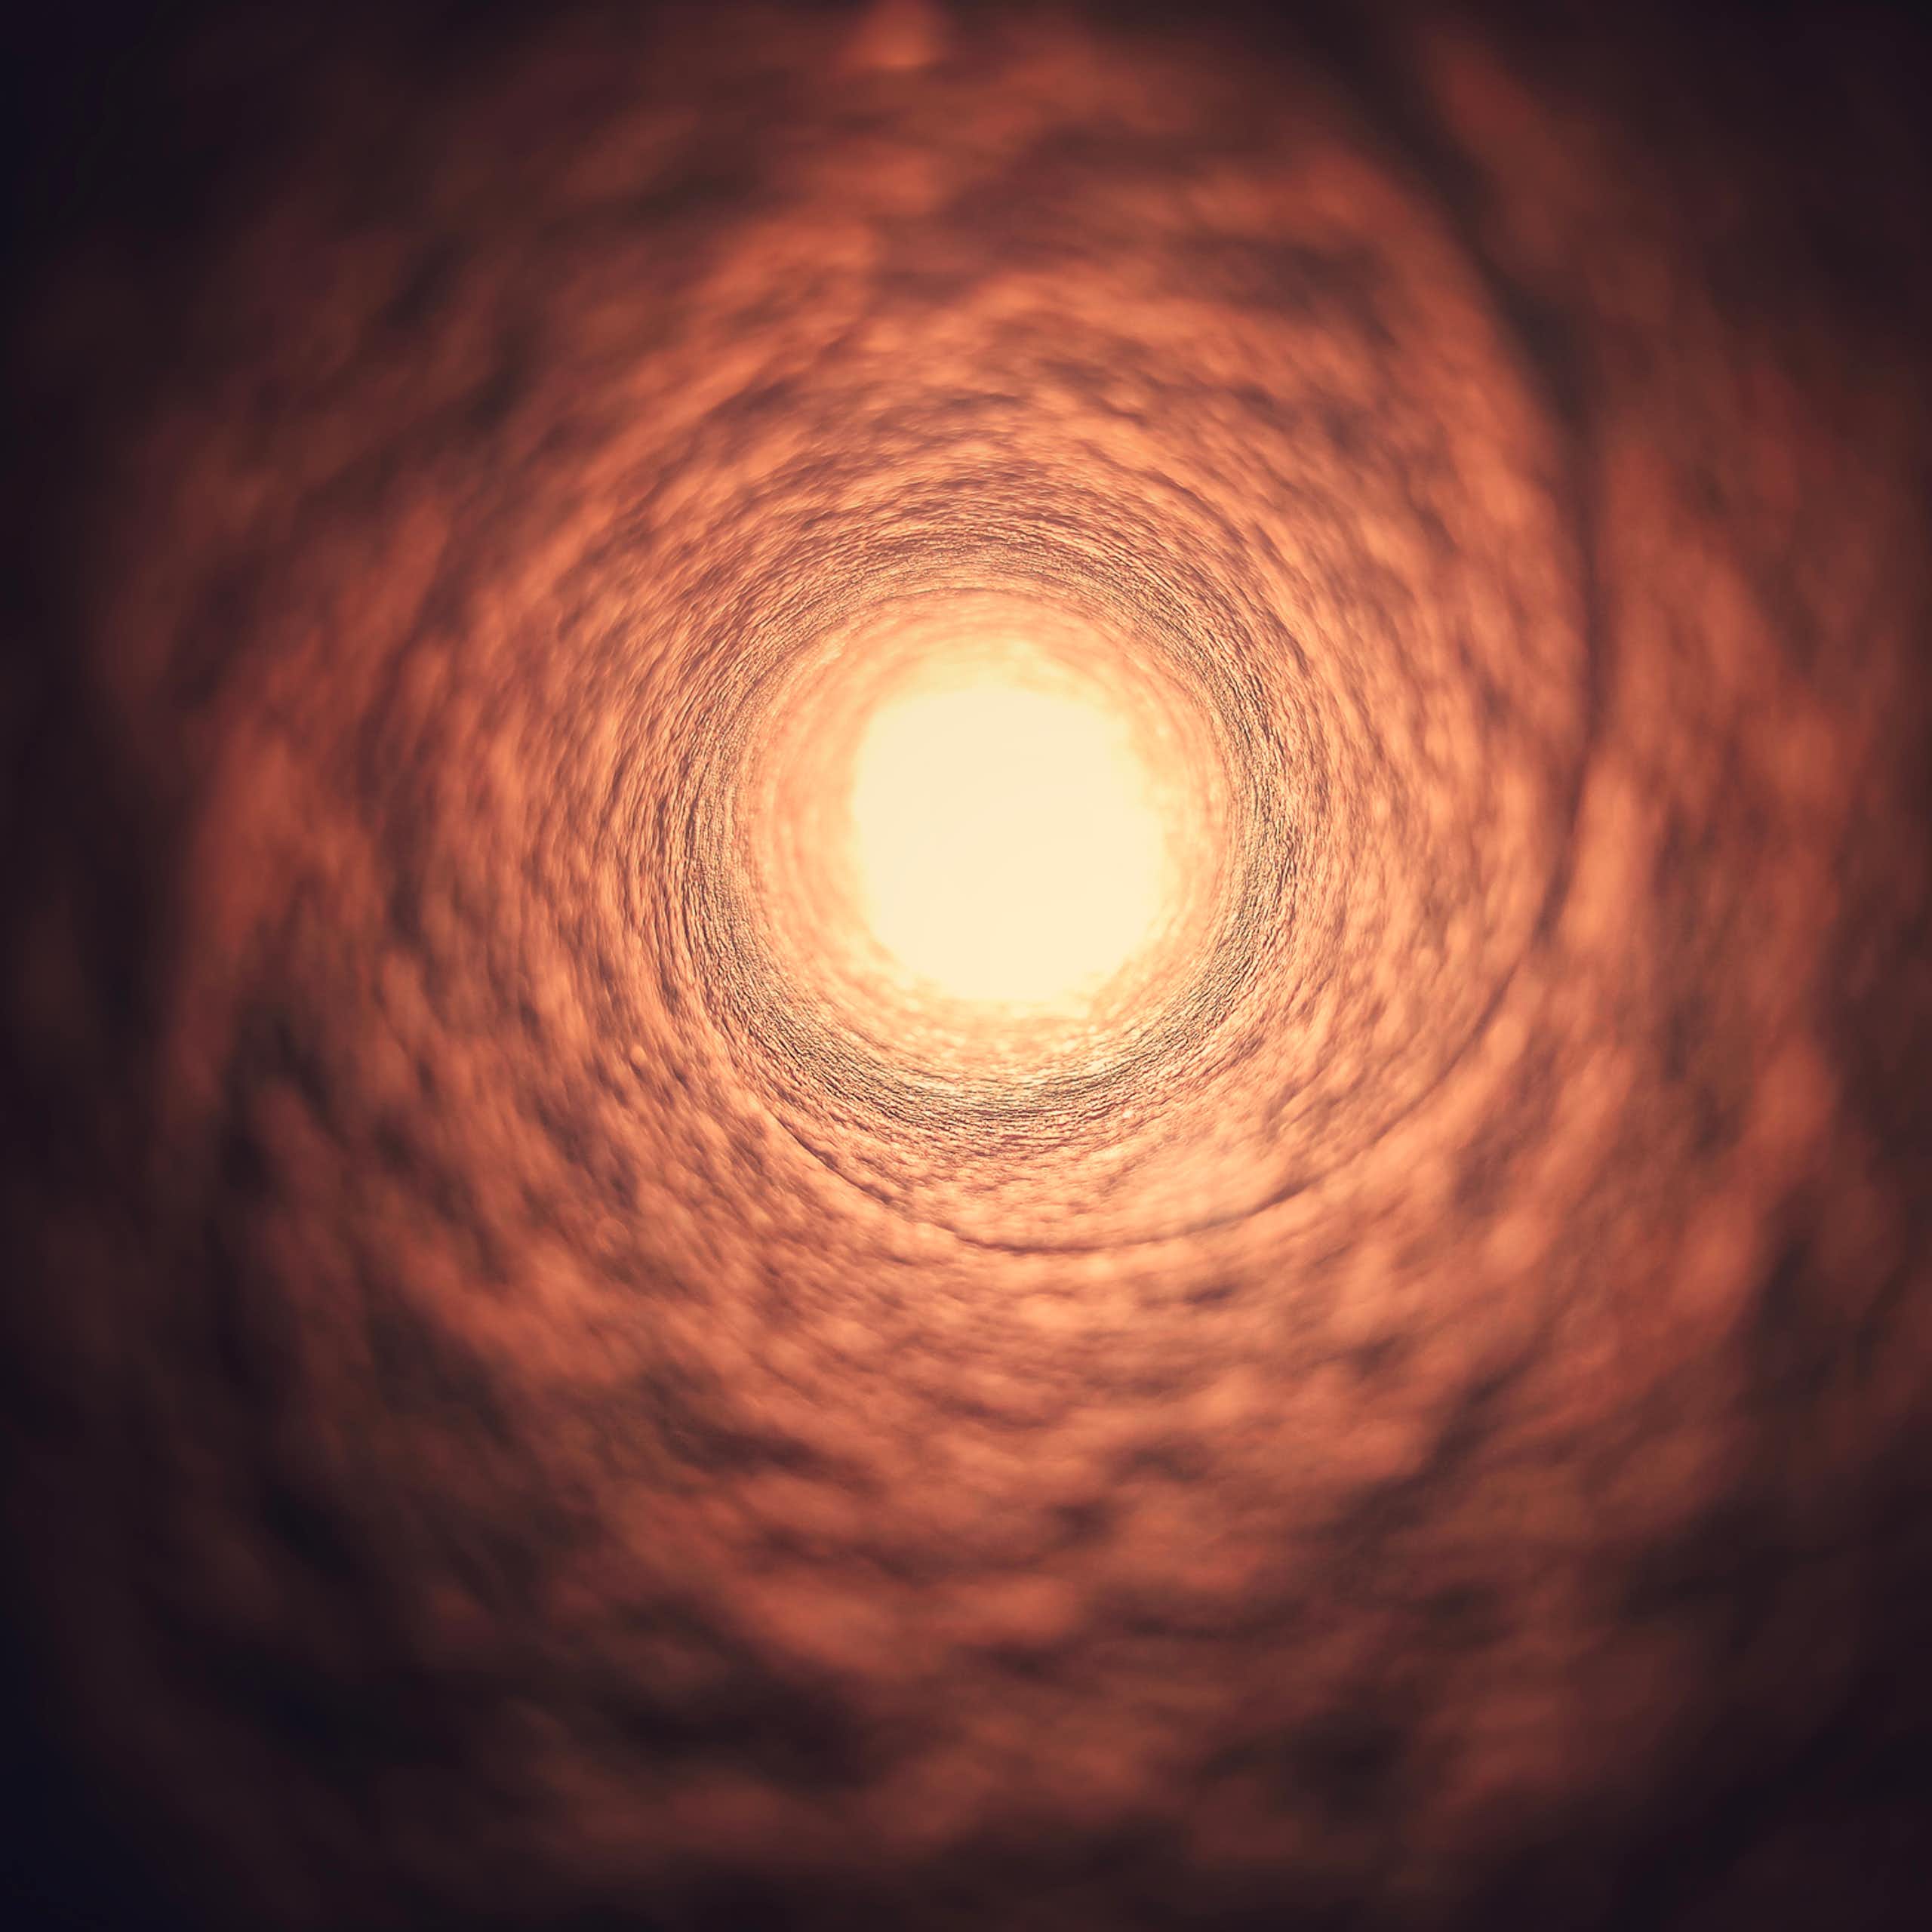 Flesh-colored, textured tunnel funnelling to a circle of light